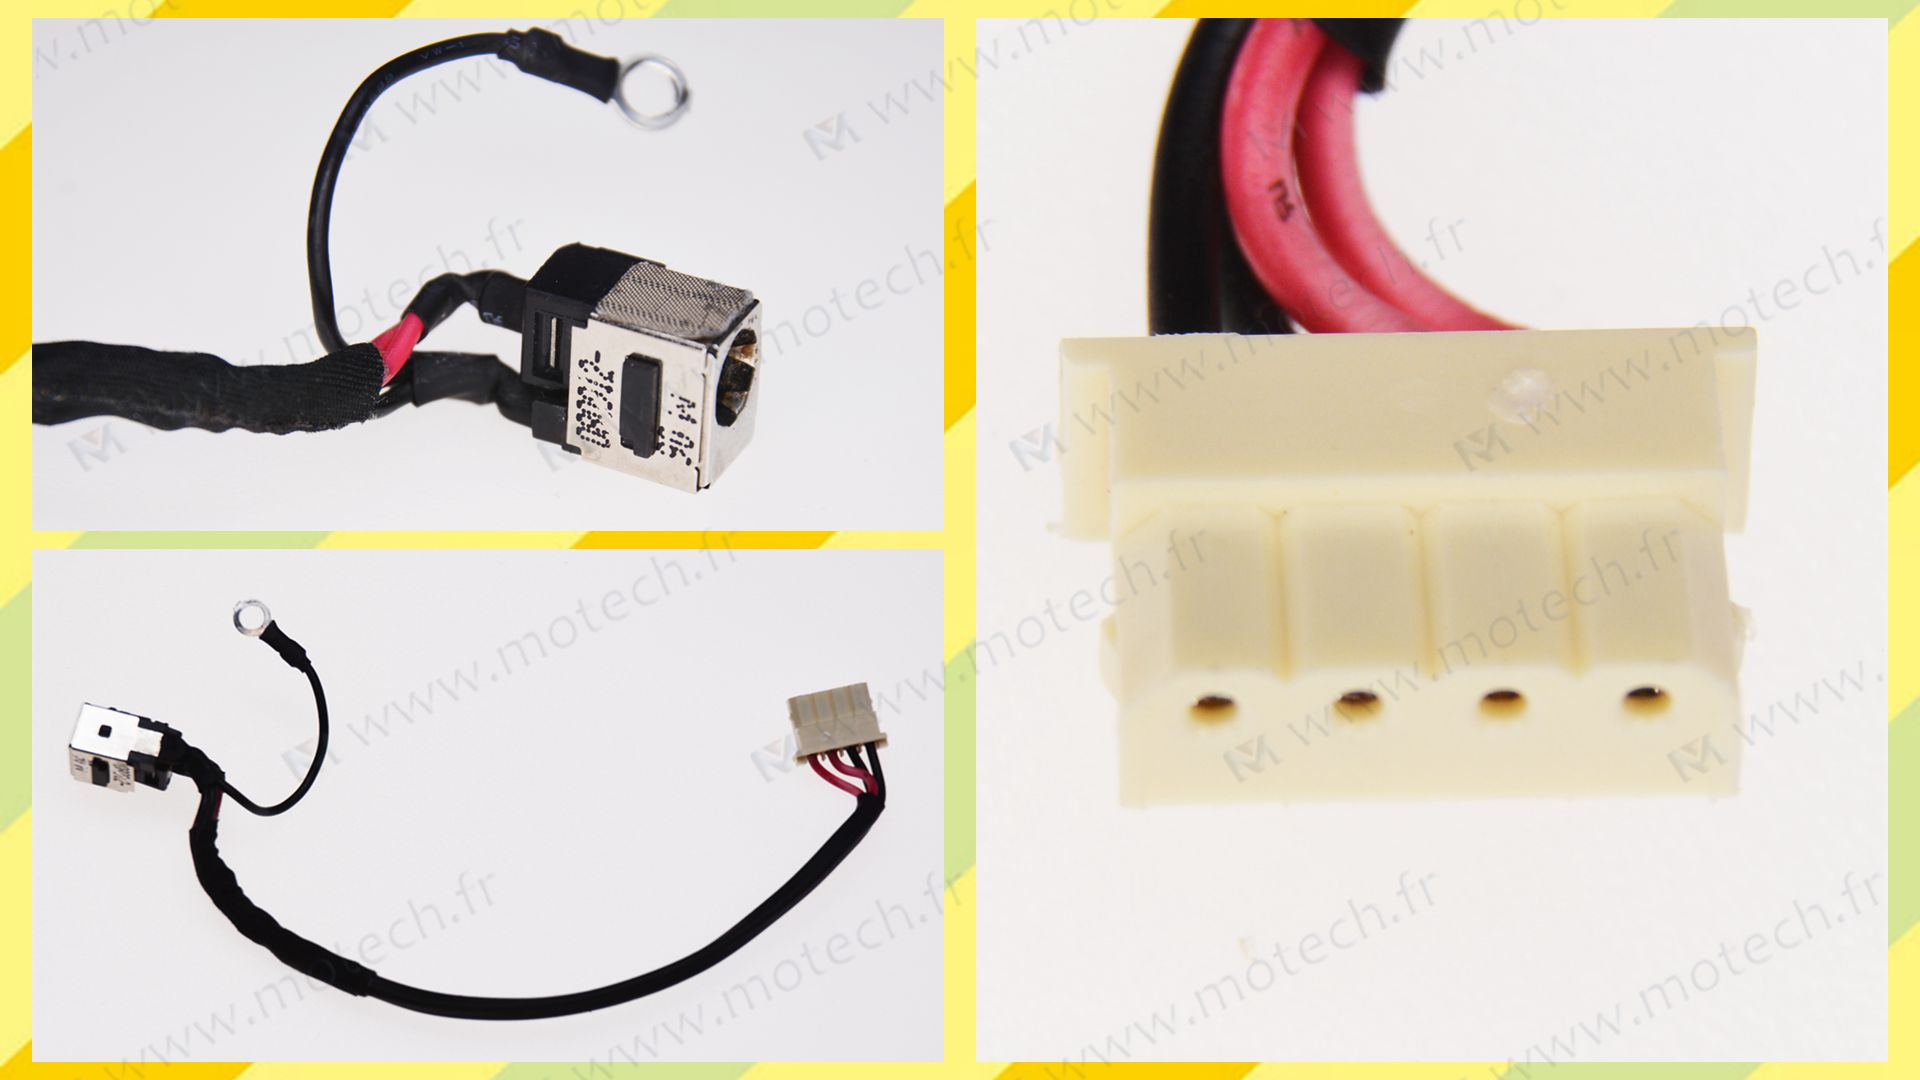 Packard Bell MB88 charging connector, Packard Bell MB88 DC Power Jack, Packard Bell MB88 DC IN Cable, Packard Bell MB88 Power Jack, Packard Bell MB88 plug, Packard Bell MB88 Jack socket, Packard Bell MB88 connecteur de charge, 